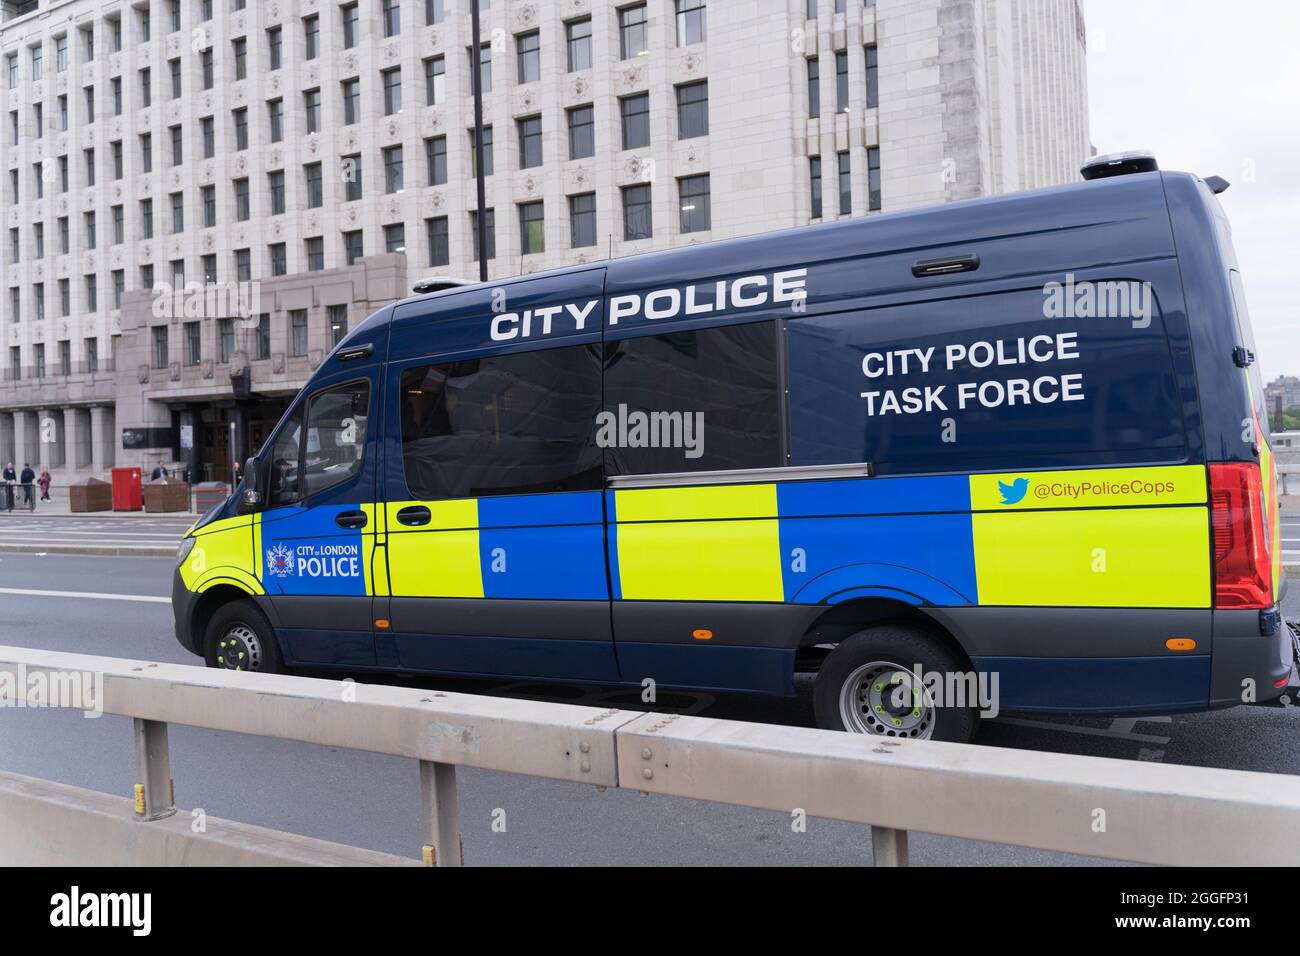 London, UK. 31sth August 2021. London Bridge reopend for traffic  in both directions after an afternoon's block-off by  Extinction Rebellion XR protesting for climate change at south side of London Bridge near Borough Market.  City Police Task Force van Credit: Xiu Bao/Alamy Live News Stock Photo